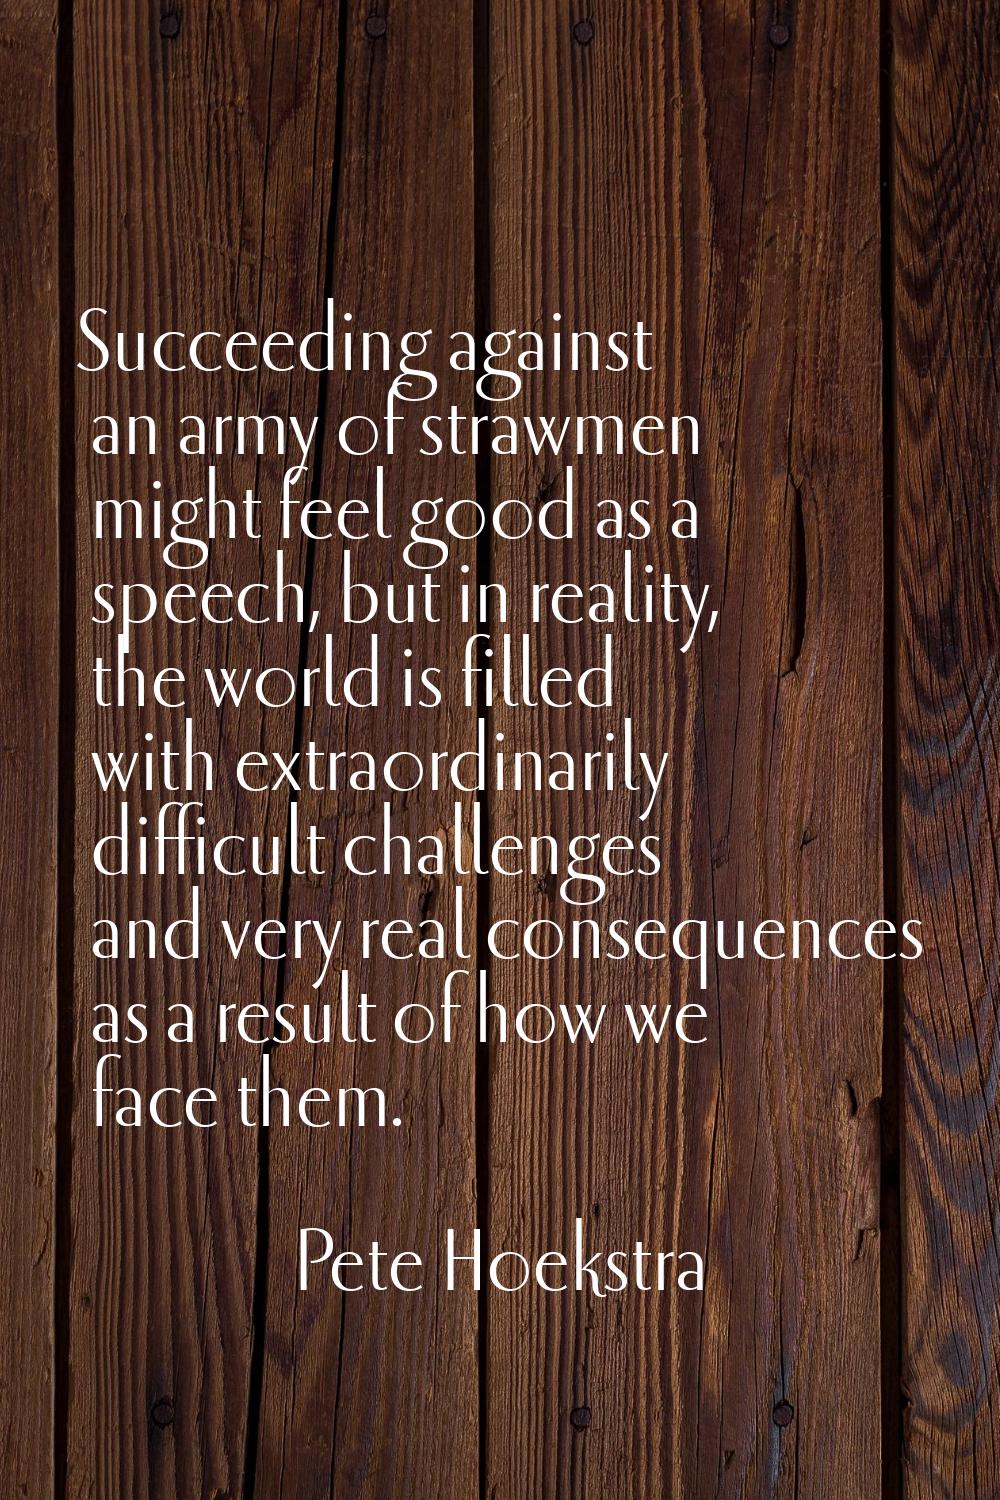 Succeeding against an army of strawmen might feel good as a speech, but in reality, the world is fi